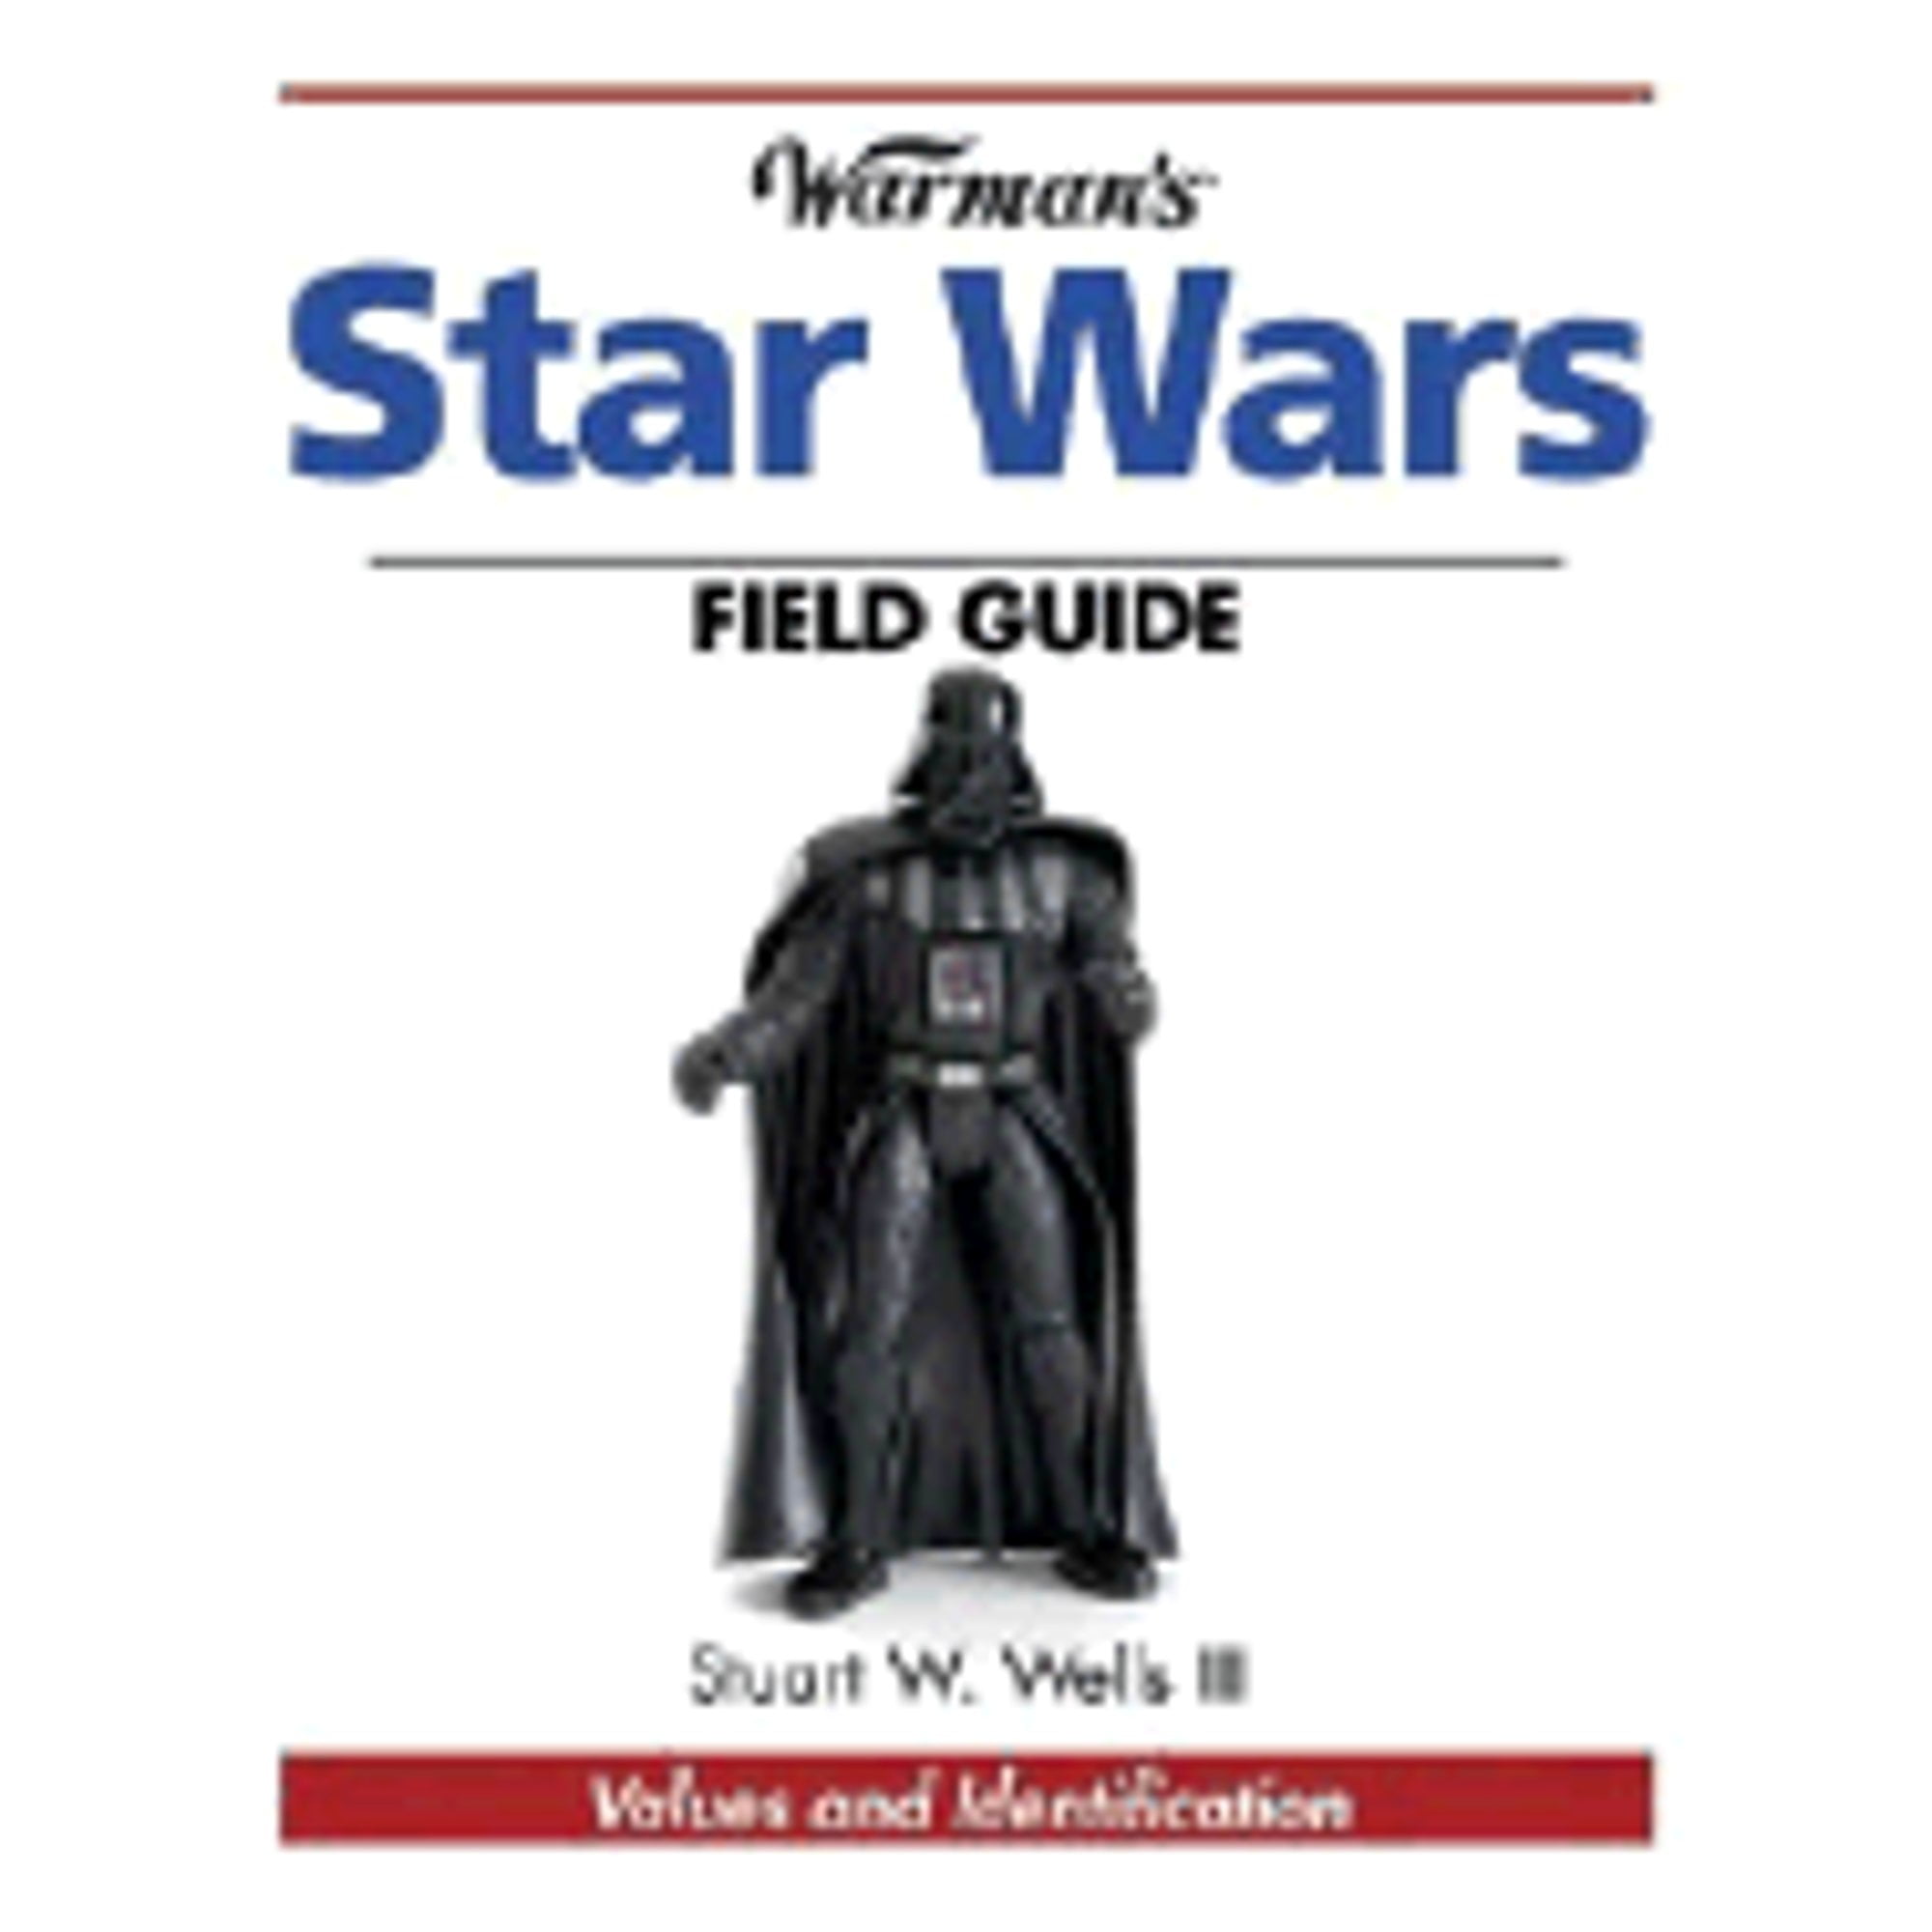 Pre-Owned Warman's Star Wars Field Guide: Values and Identification (Paperback 9780896891340) by Stuart W Wells